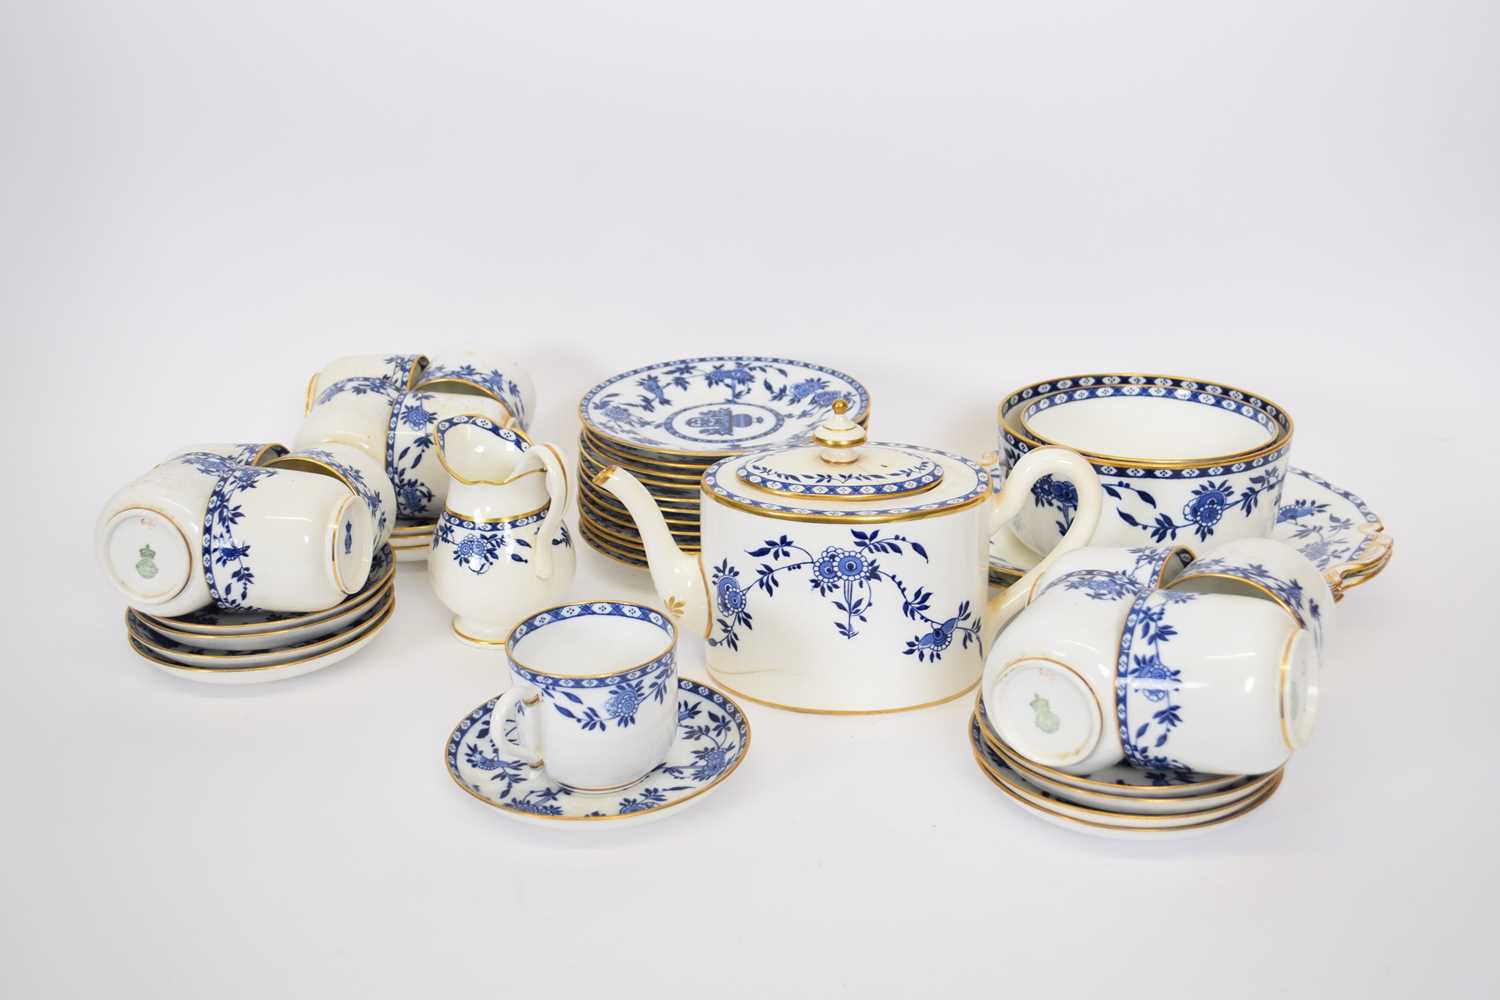 Extensive late 19th century Minton tea set all decorated in the Delft pattern including 12 cups, - Image 3 of 5